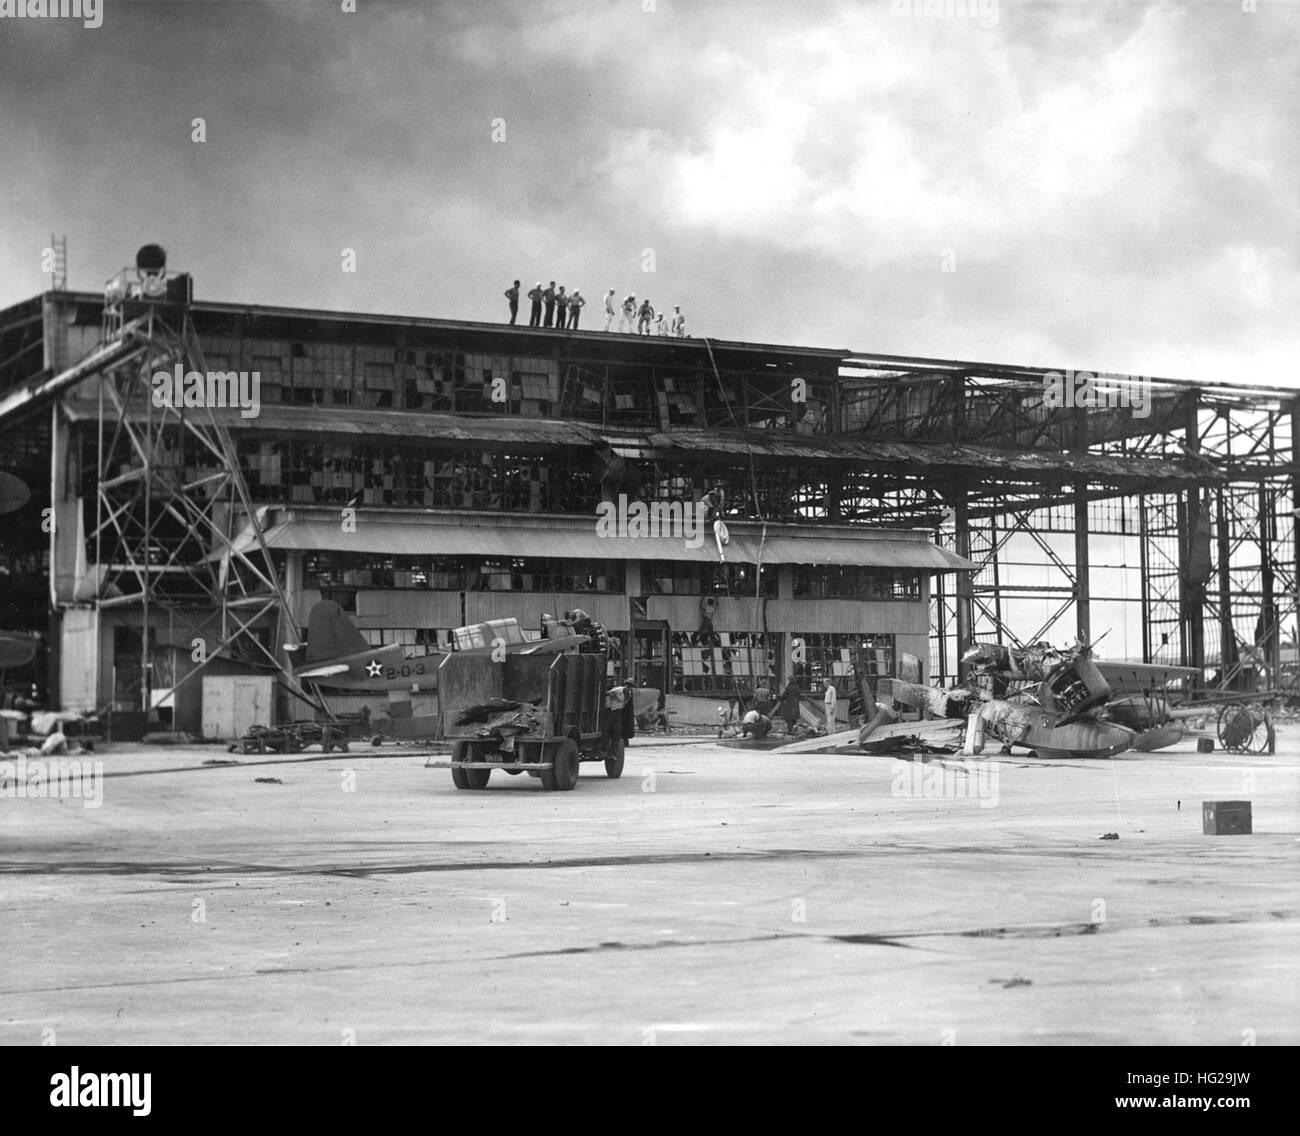 Wrecked hangar at the Ford Island Naval Air Station seaplane base on 8 December 1941, the day after the Japanese air attack. In the right foreground is a destroyed OS2U floatplane. Another OS2U (marked 2-O-3) is under repair to the left. Official U.S. Navy Photograph, now in the collections of the National Archives. Wrecked hangar at NAS Ford Island with OS2Us 1941 Stock Photo